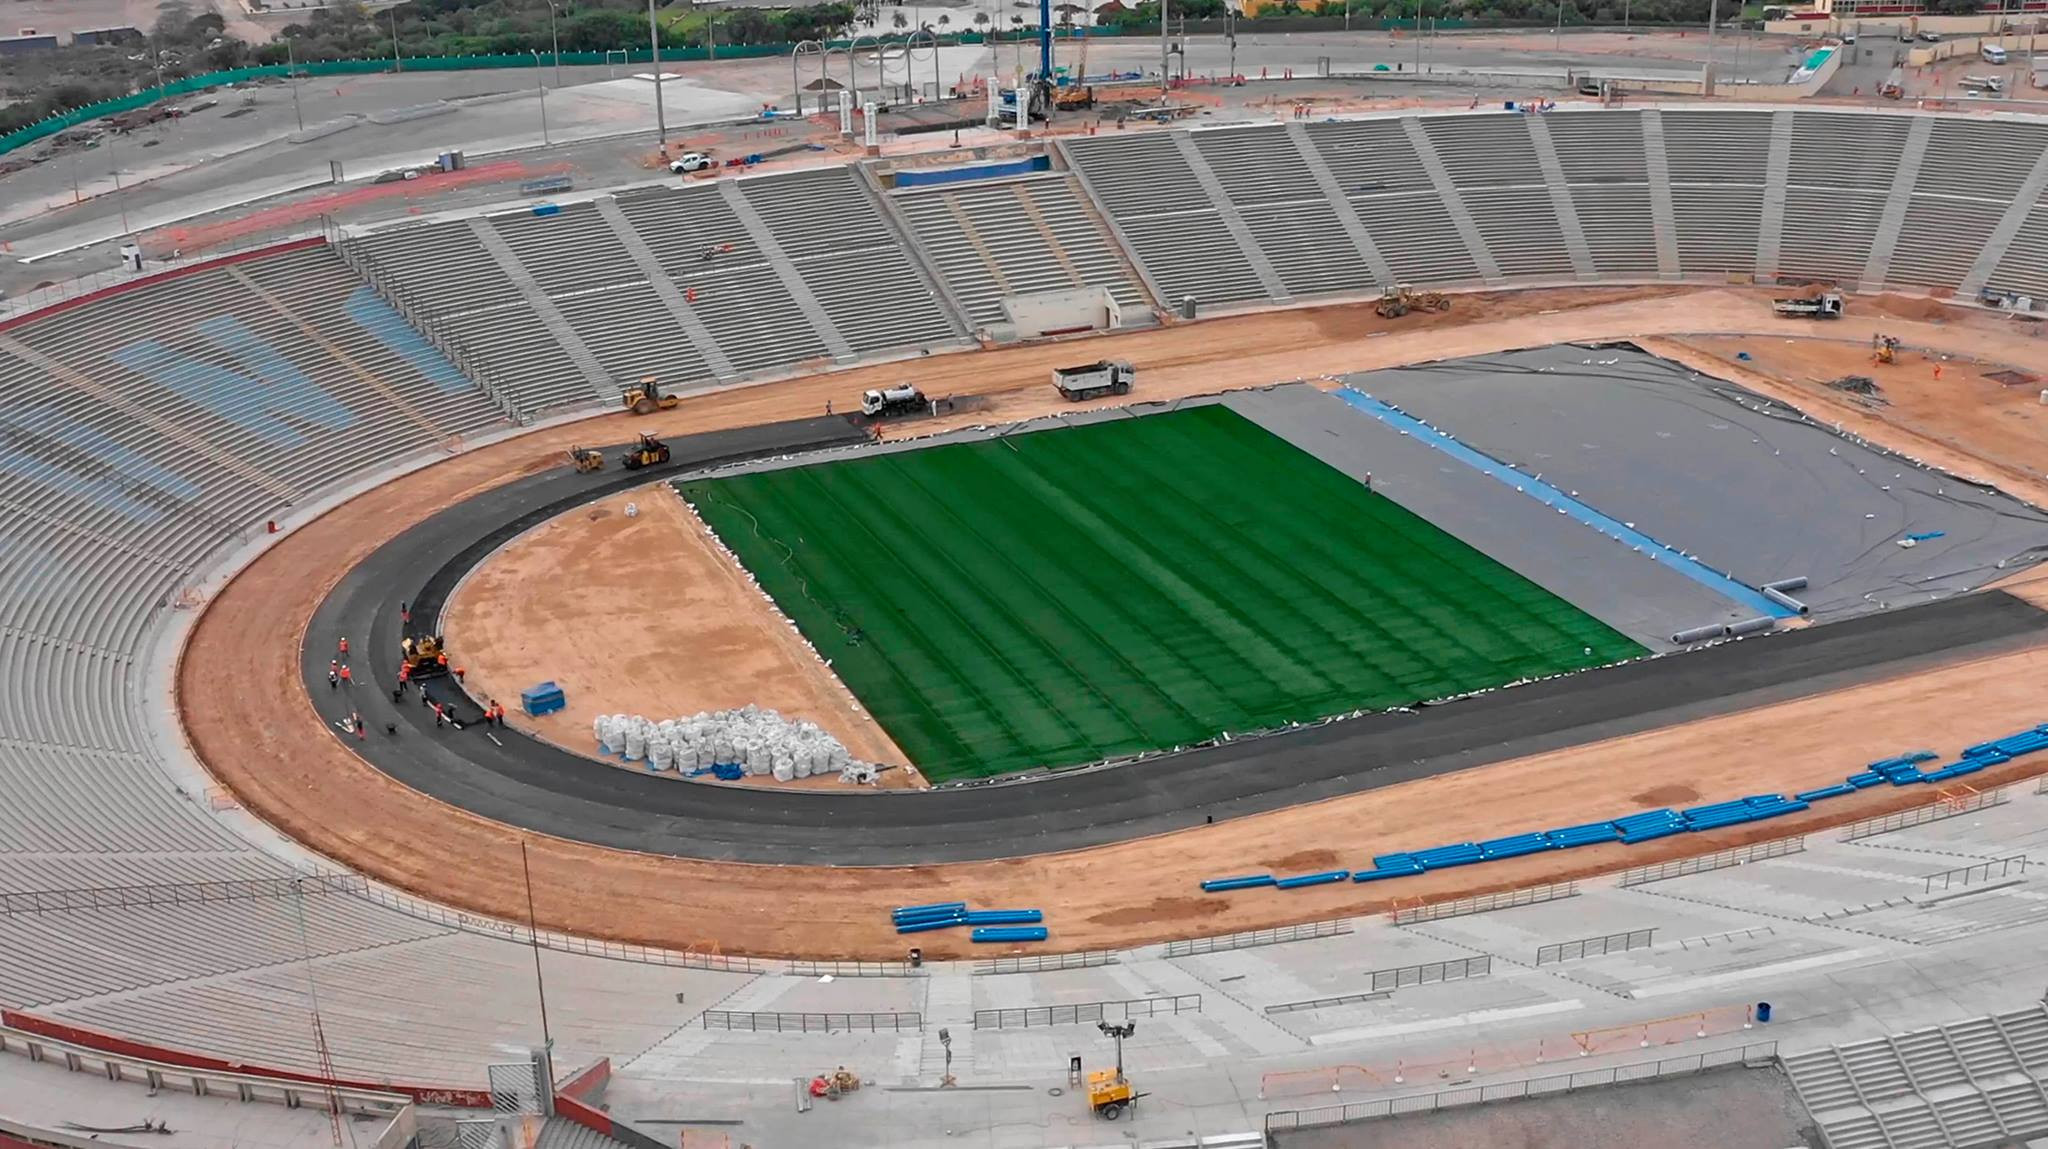 Several venues including the main stadium for the Pan American and Parapan America Games in remain under construction, though they are due to be completed next month ©Lima 2019